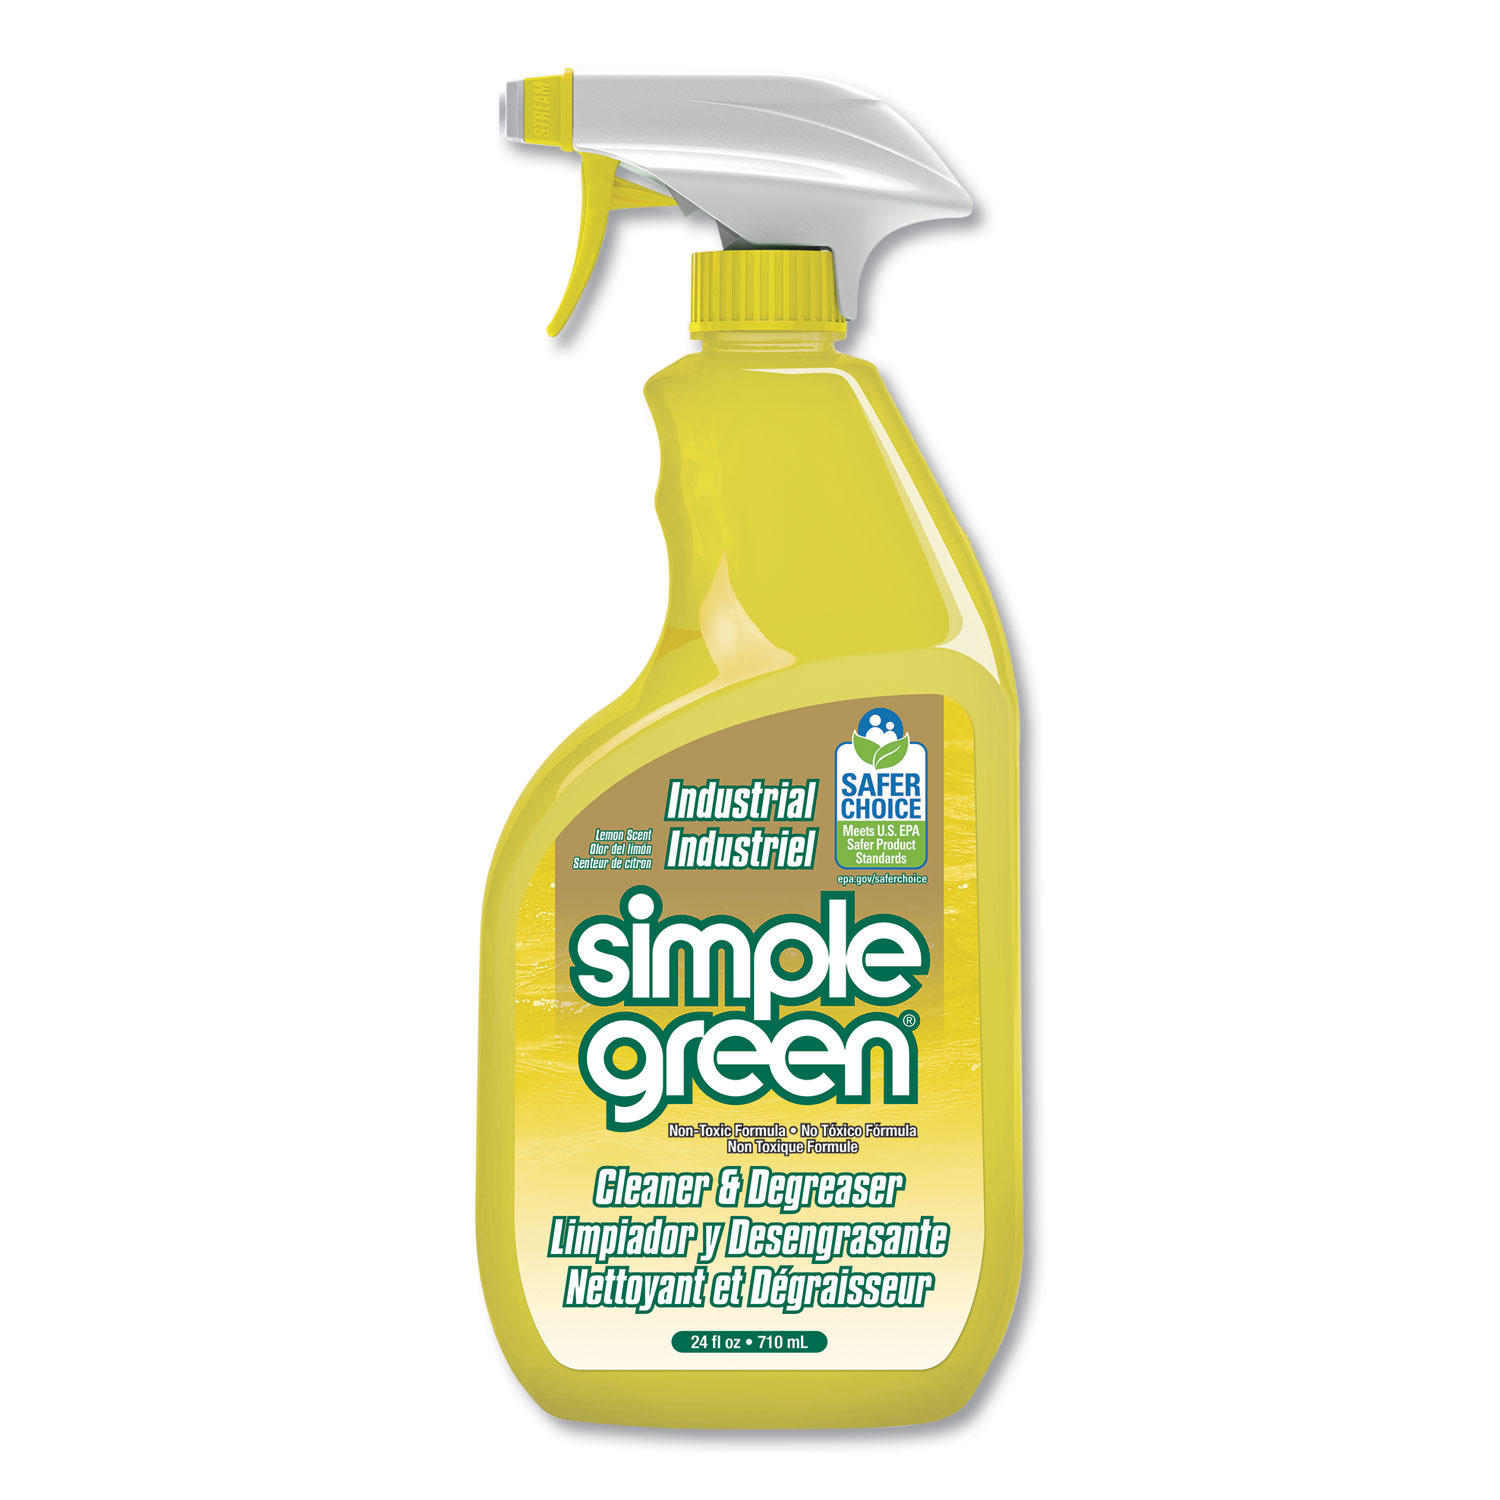  Simple Green 3010001214002 Industrial Cleaner and Degreaser, Concentrated, Lemon, 24 oz Bottle, 12/Carton (SMP14002) 